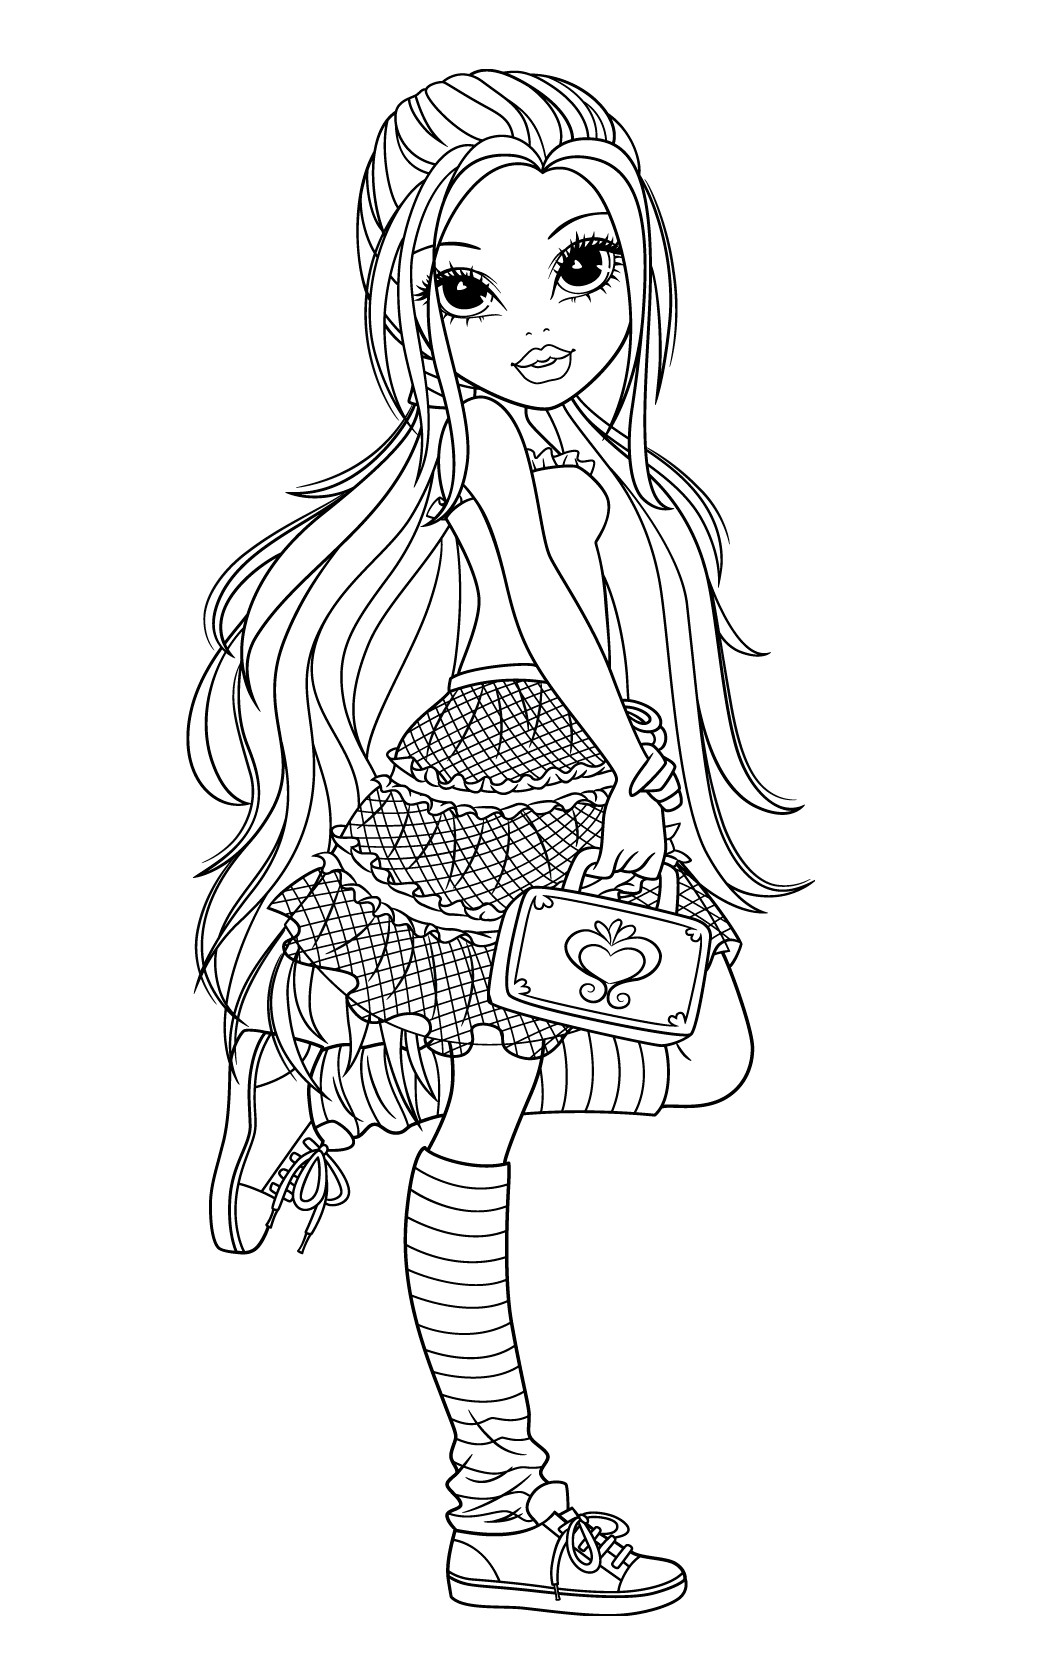 Free Coloring Books For Girls
 New Moxie Girlz Coloring Pages will be added frequently so